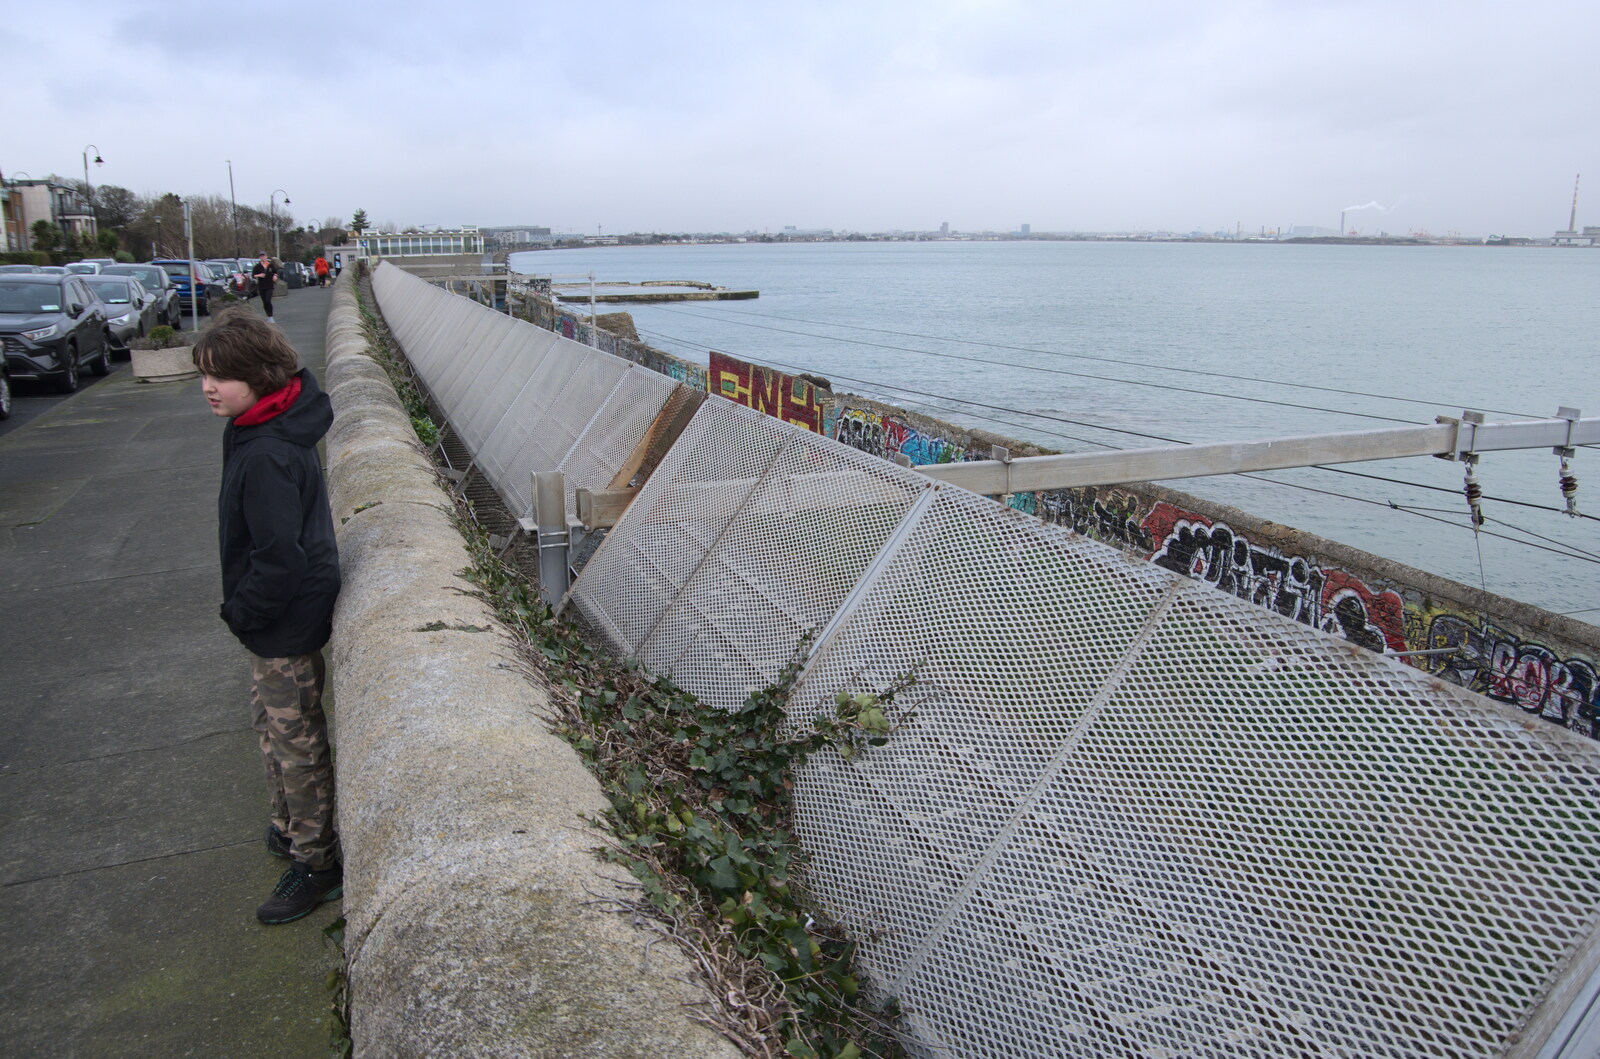 The End of the Breffni, Blackrock, Dublin - 18th February 2023: Fred leans on the wall on Idrone Terrace